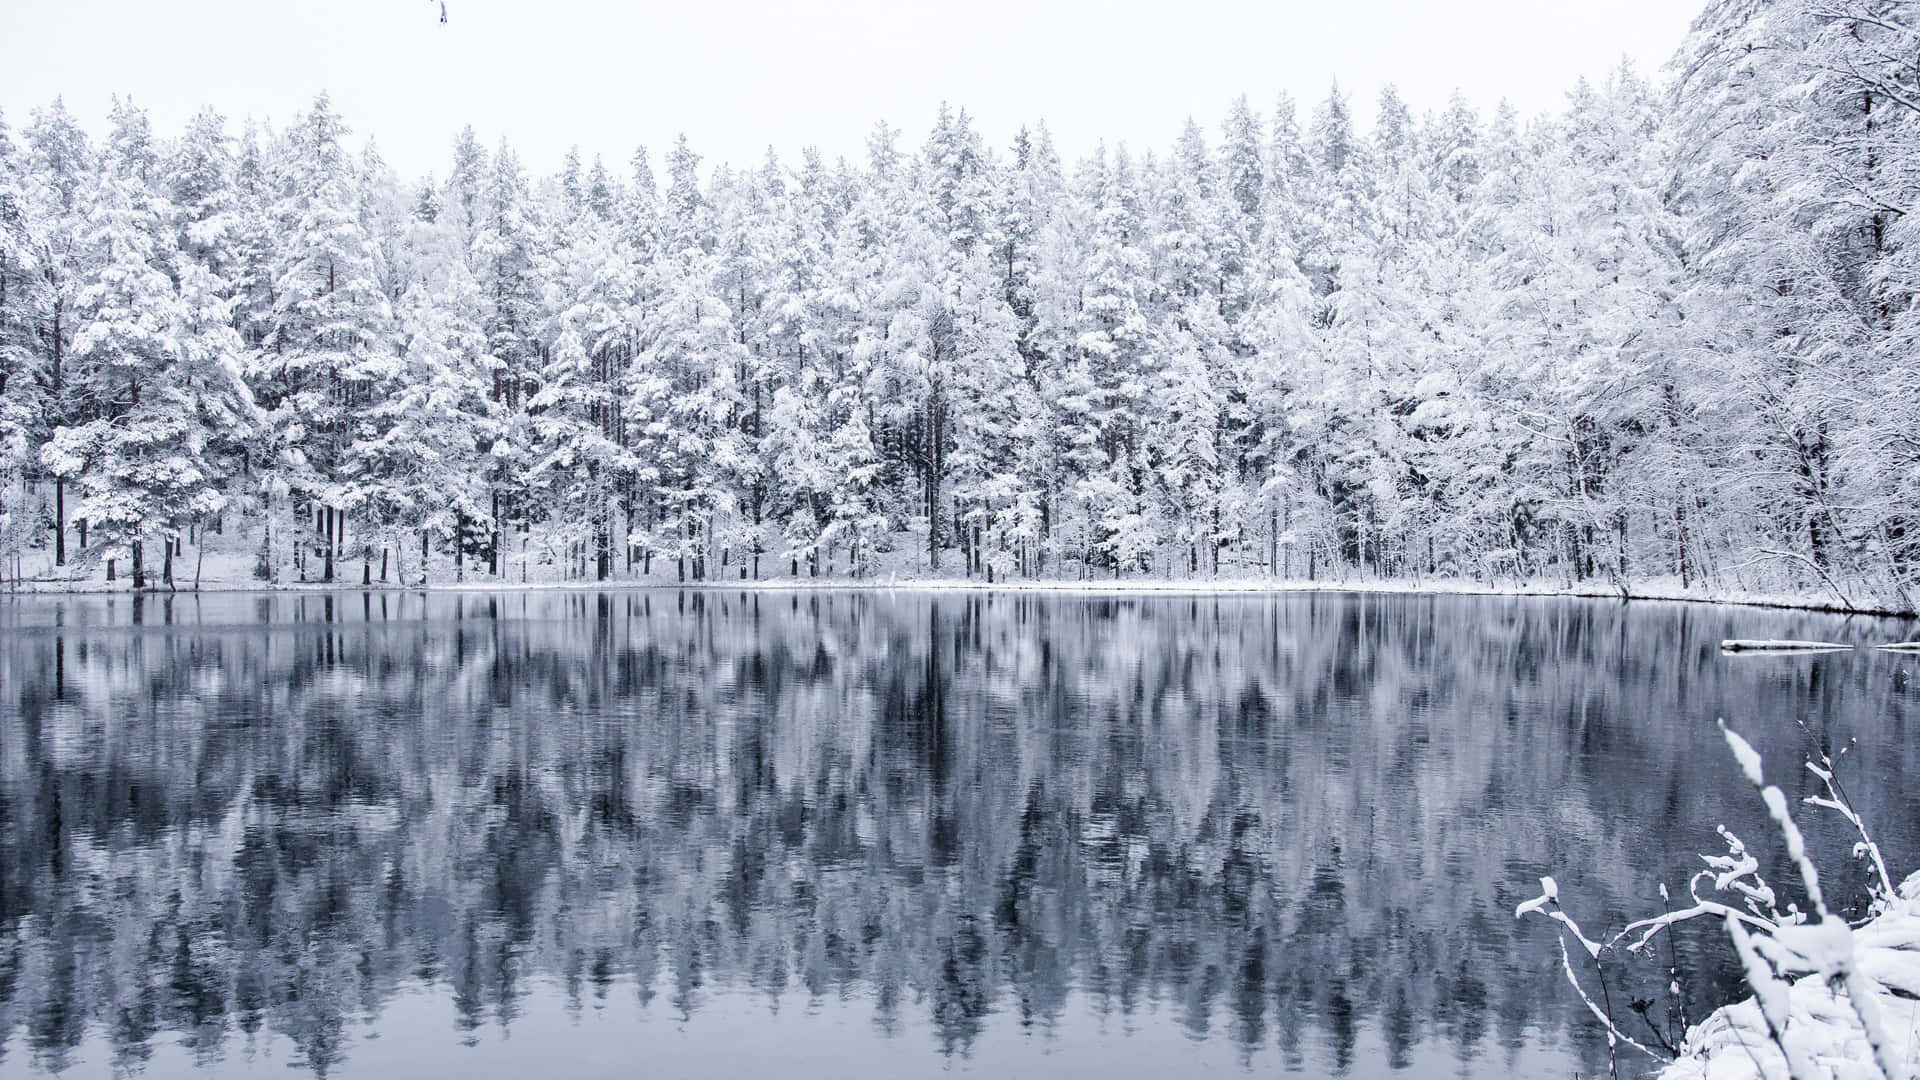 "Soak in the Serenity of NatureThis Winter in the Forest"